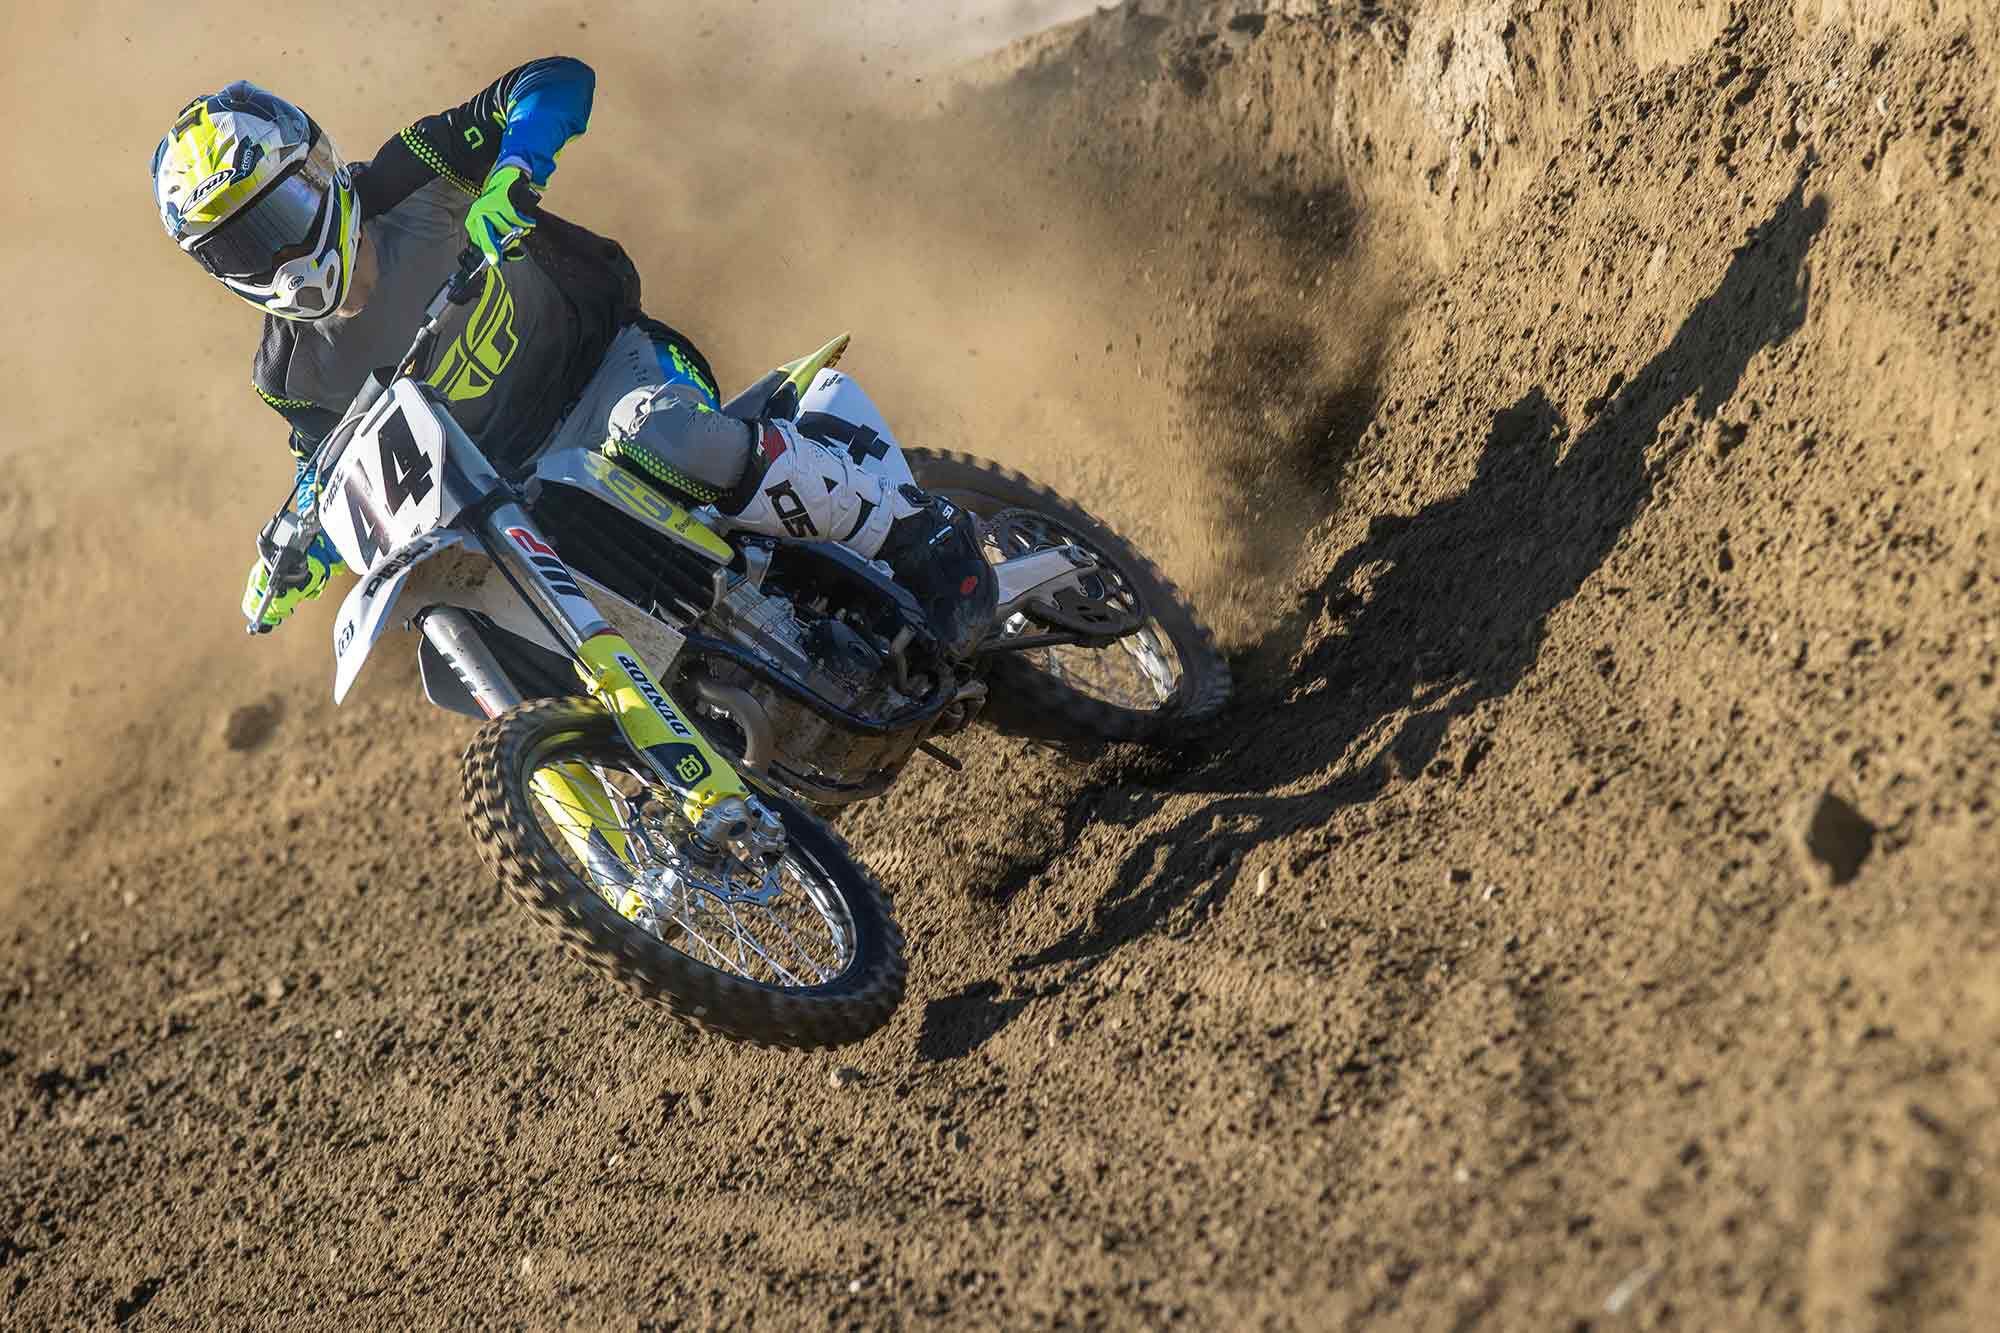 “Husqvarna and KTM came out with all-new bikes this year that have a potentially high ceiling once they get the chassis figured out. 2024 could be big for them.” <i>—Allan Brown</i>